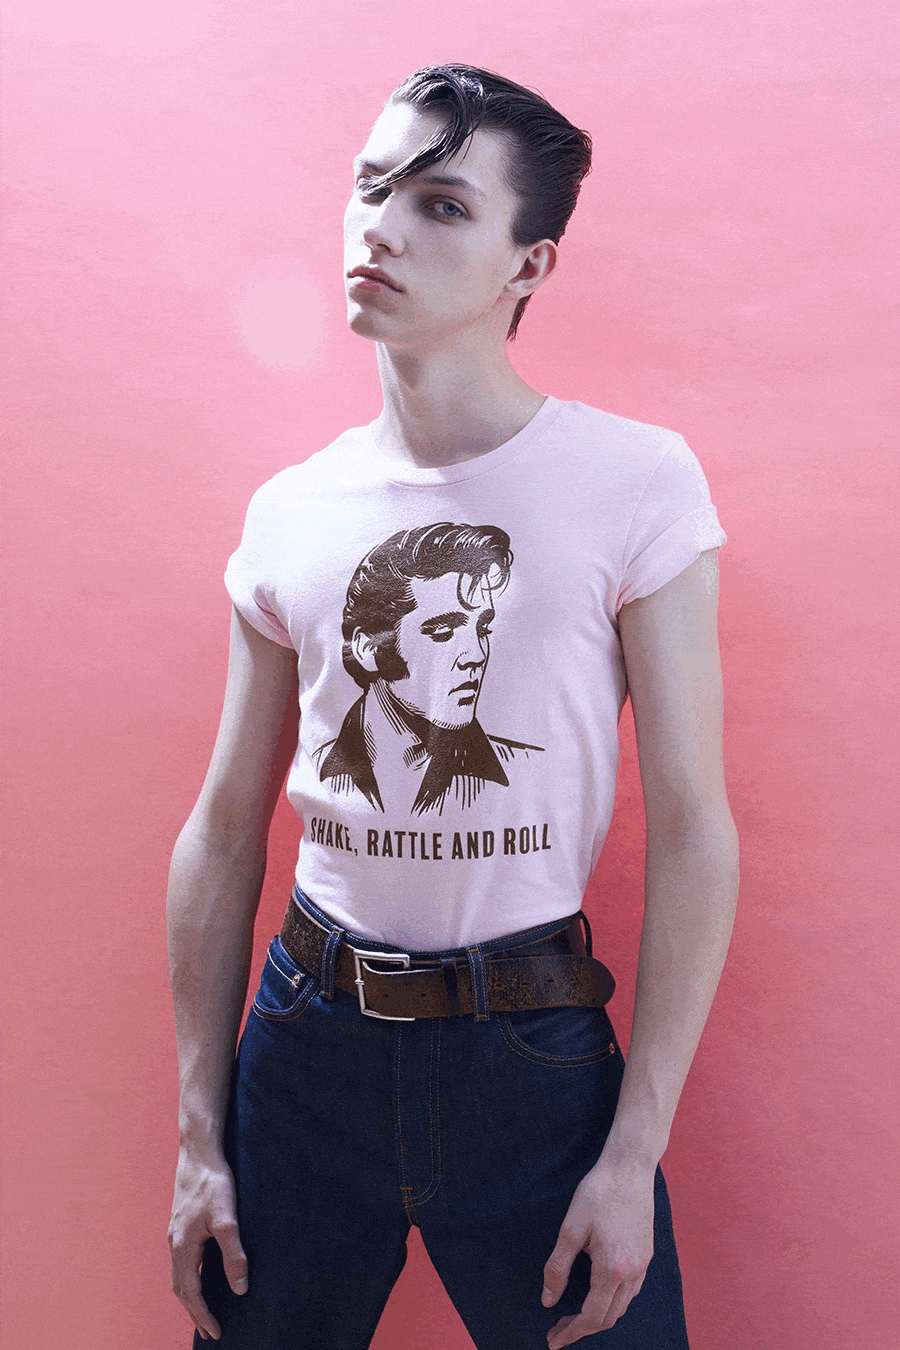 Model Calvin Gray from One Management. Photographed for Ponyboy by Alexander Thompson. GIF.